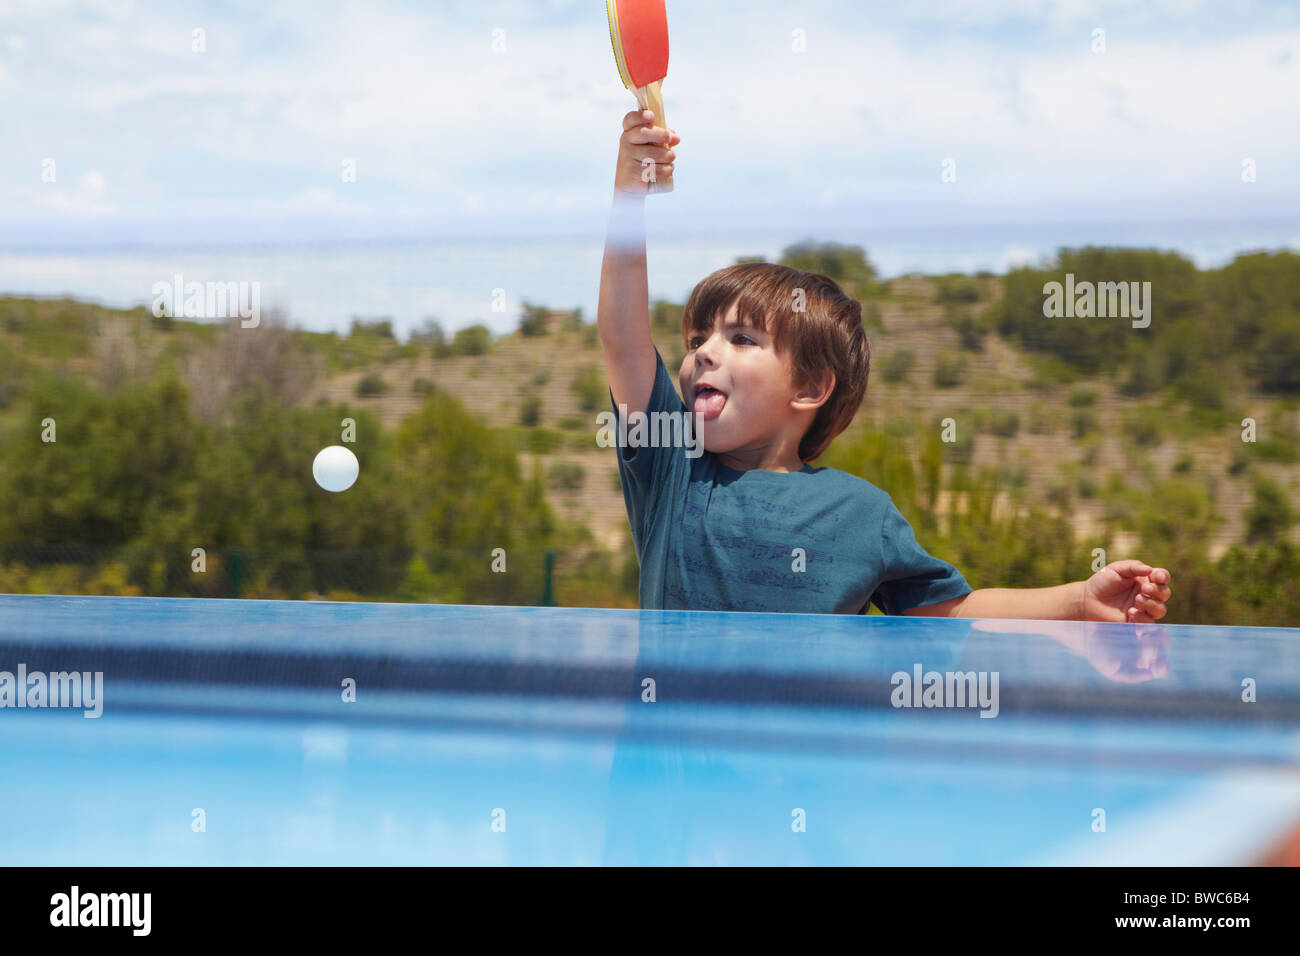 Young boy playing table tennis outdoors Stock Photo